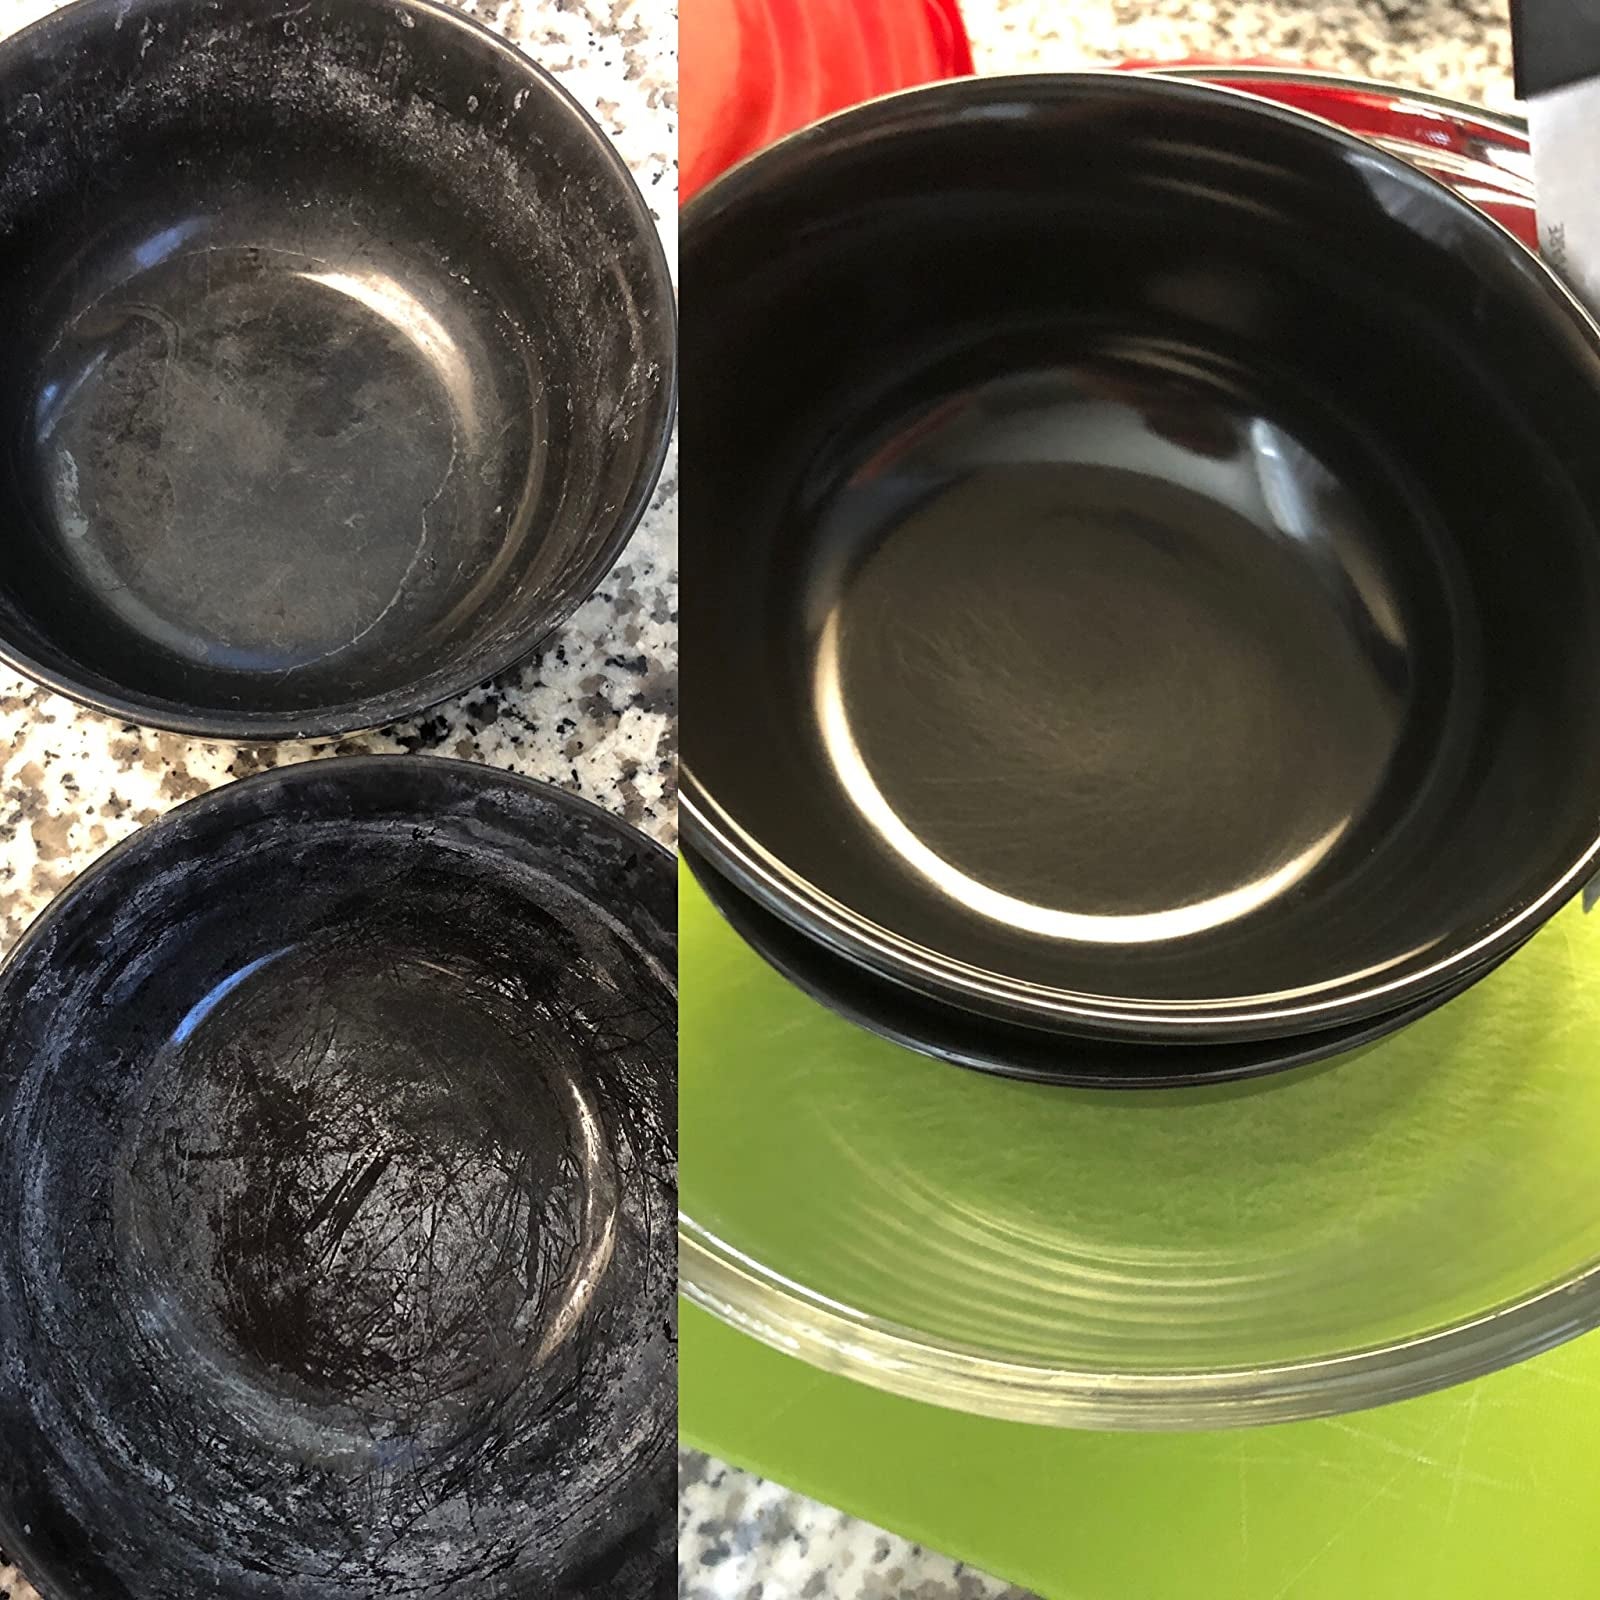 before and after reviewer images of dark bowls with white film on them becoming clean